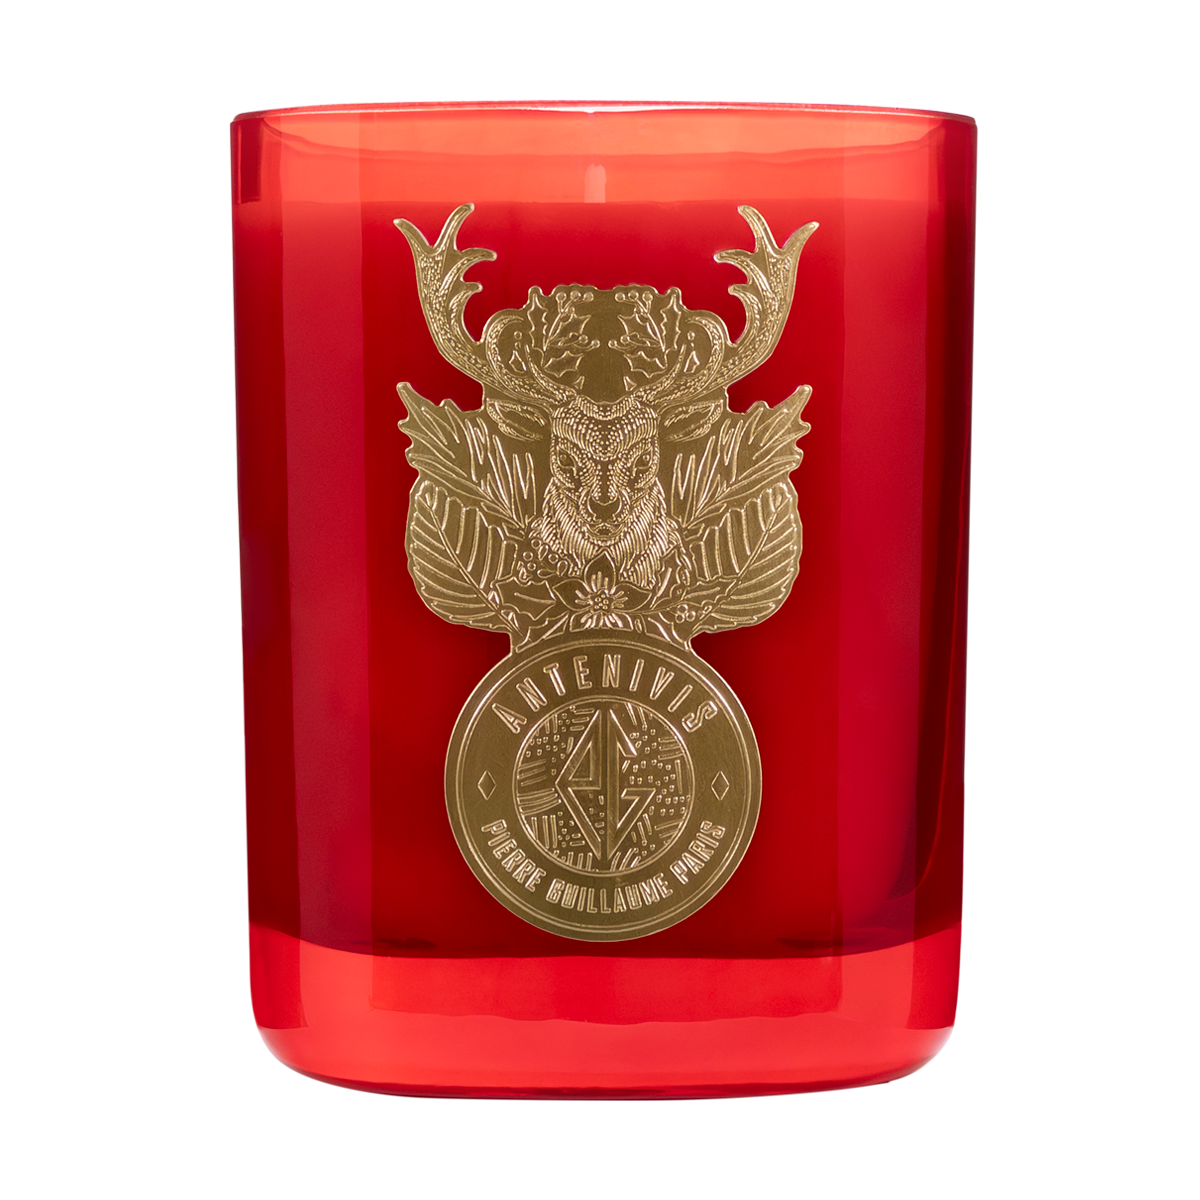 ANTENIVIS Scented Candle 240gr - Available from 10th of December